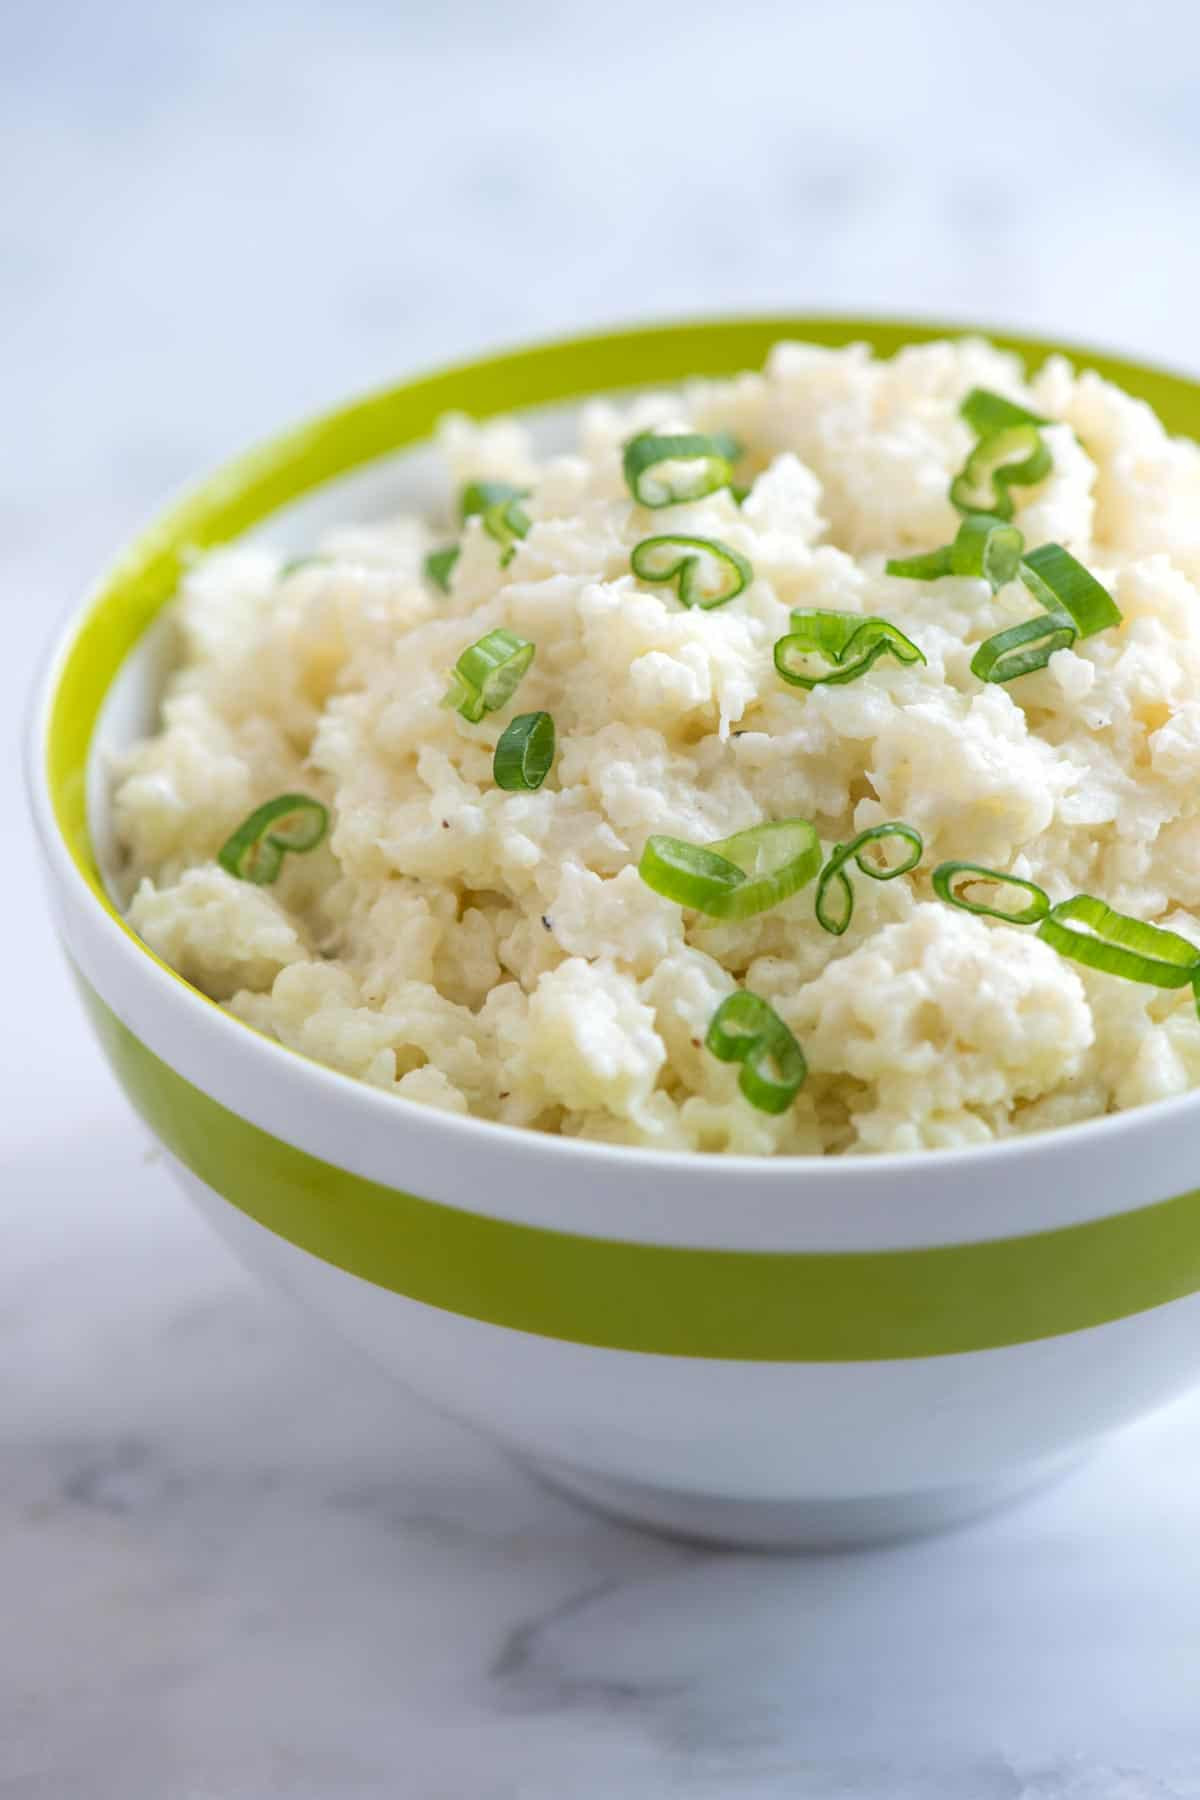 Recipes For Cauliflower Mashed Potatoes
 20 Minute Mashed Cauliflower Recipe